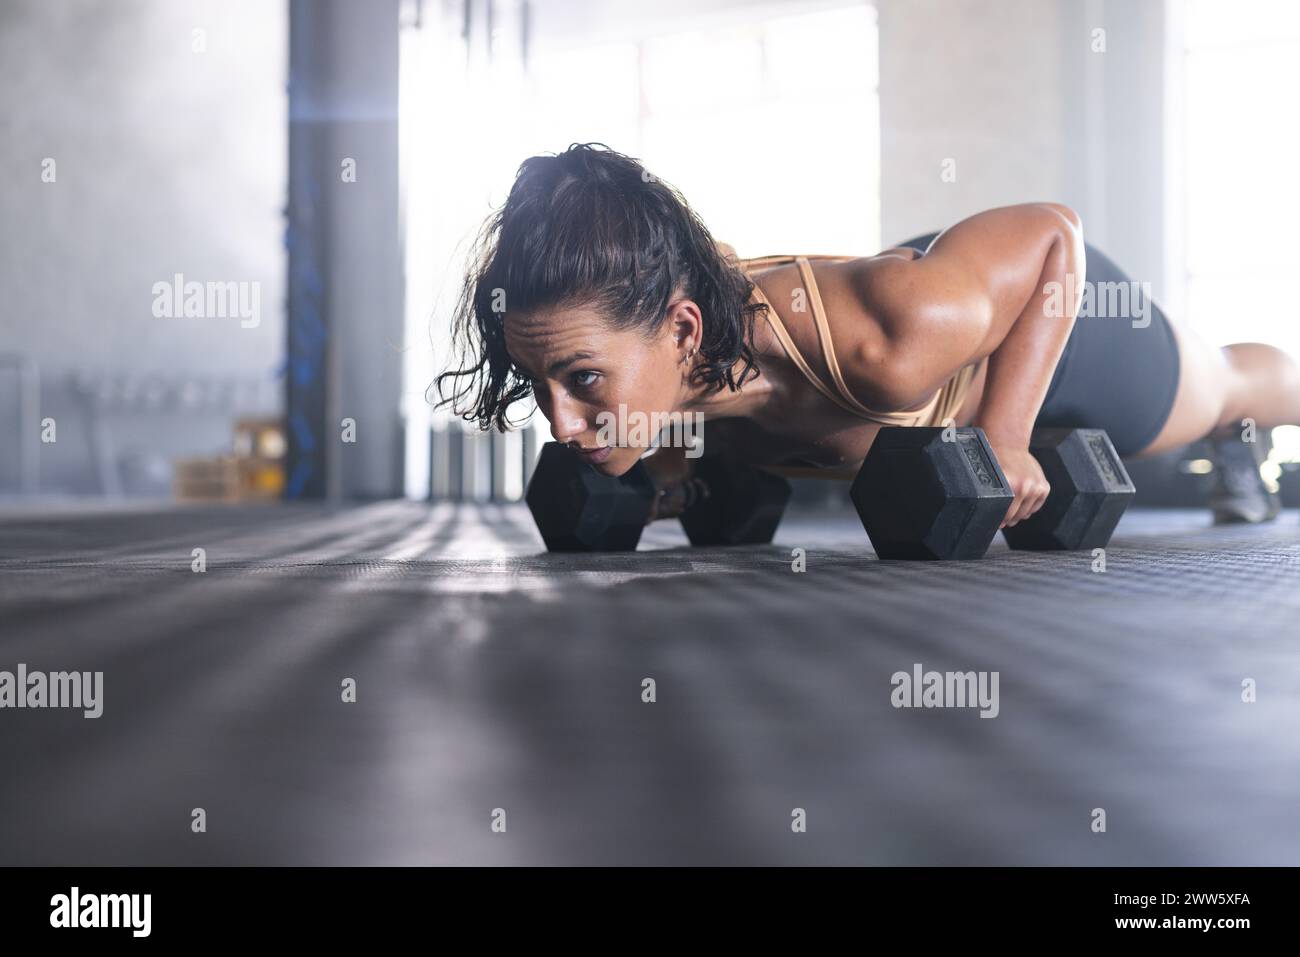 A fit Caucasian woman engages in strength training with dumbbells in the gym Stock Photo